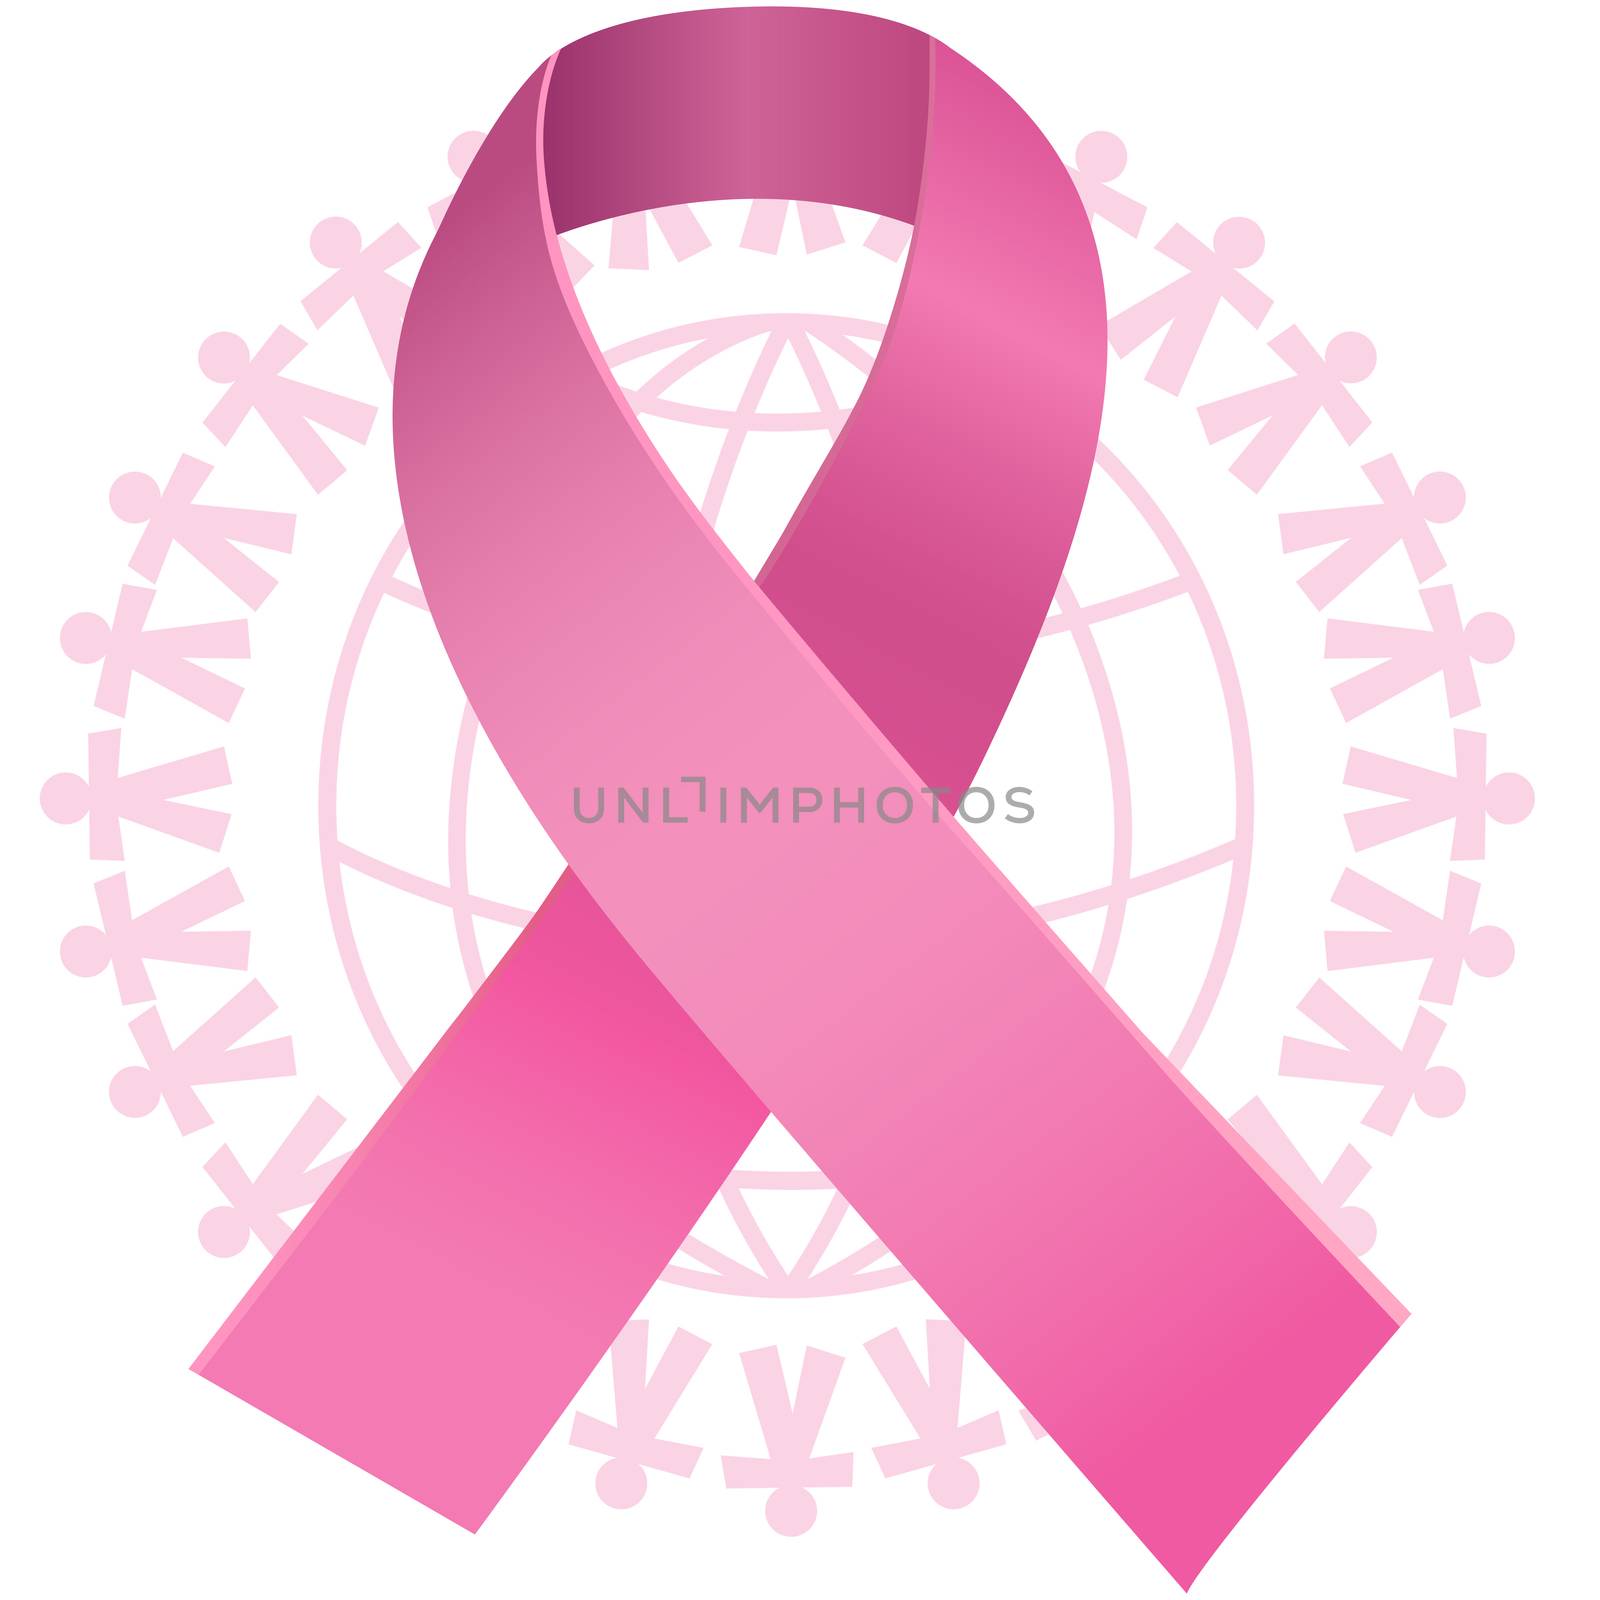 Breast cancer awareness message against pink earth for breast cancer